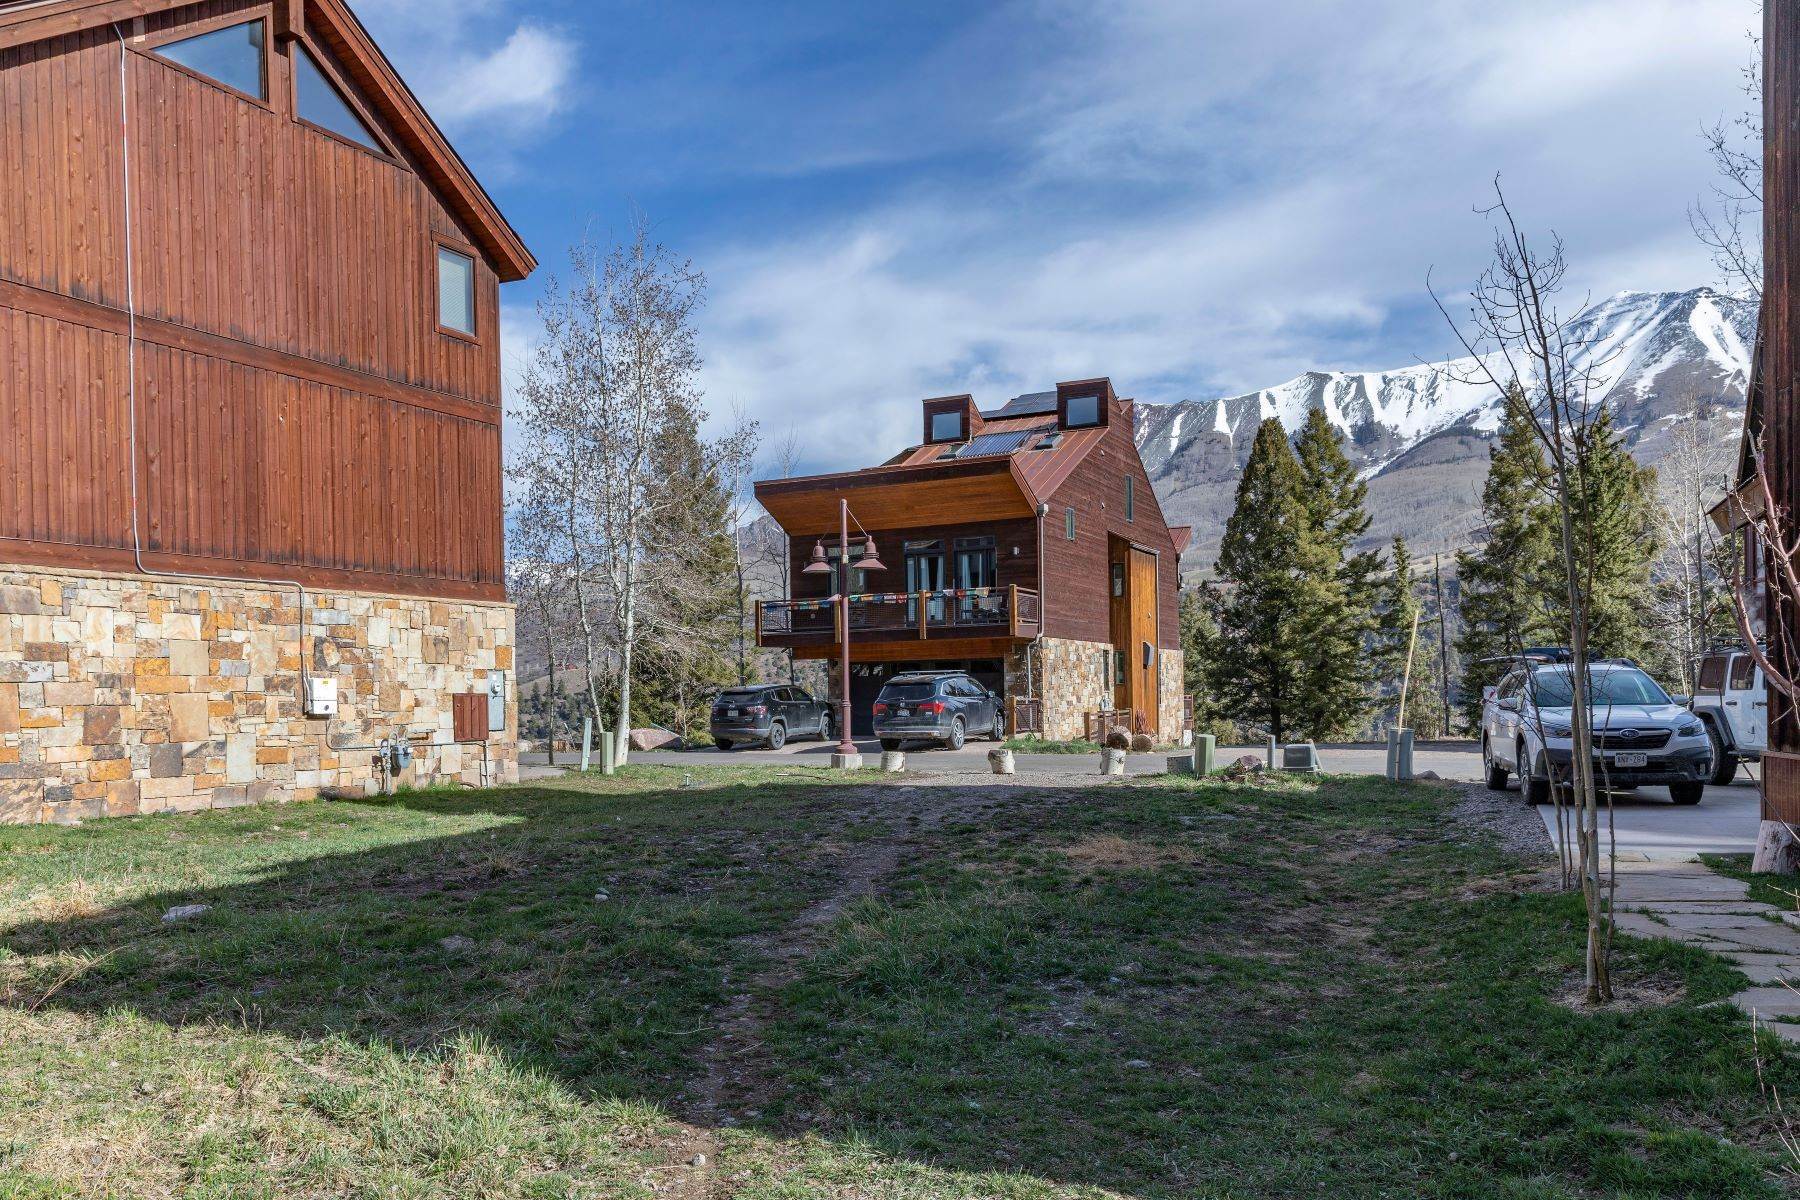 Land for Active at 17 Boulders Way, Mountain Village, CO, 81435 17 Boulders Way 649R Mountain Village, Colorado 81435 United States